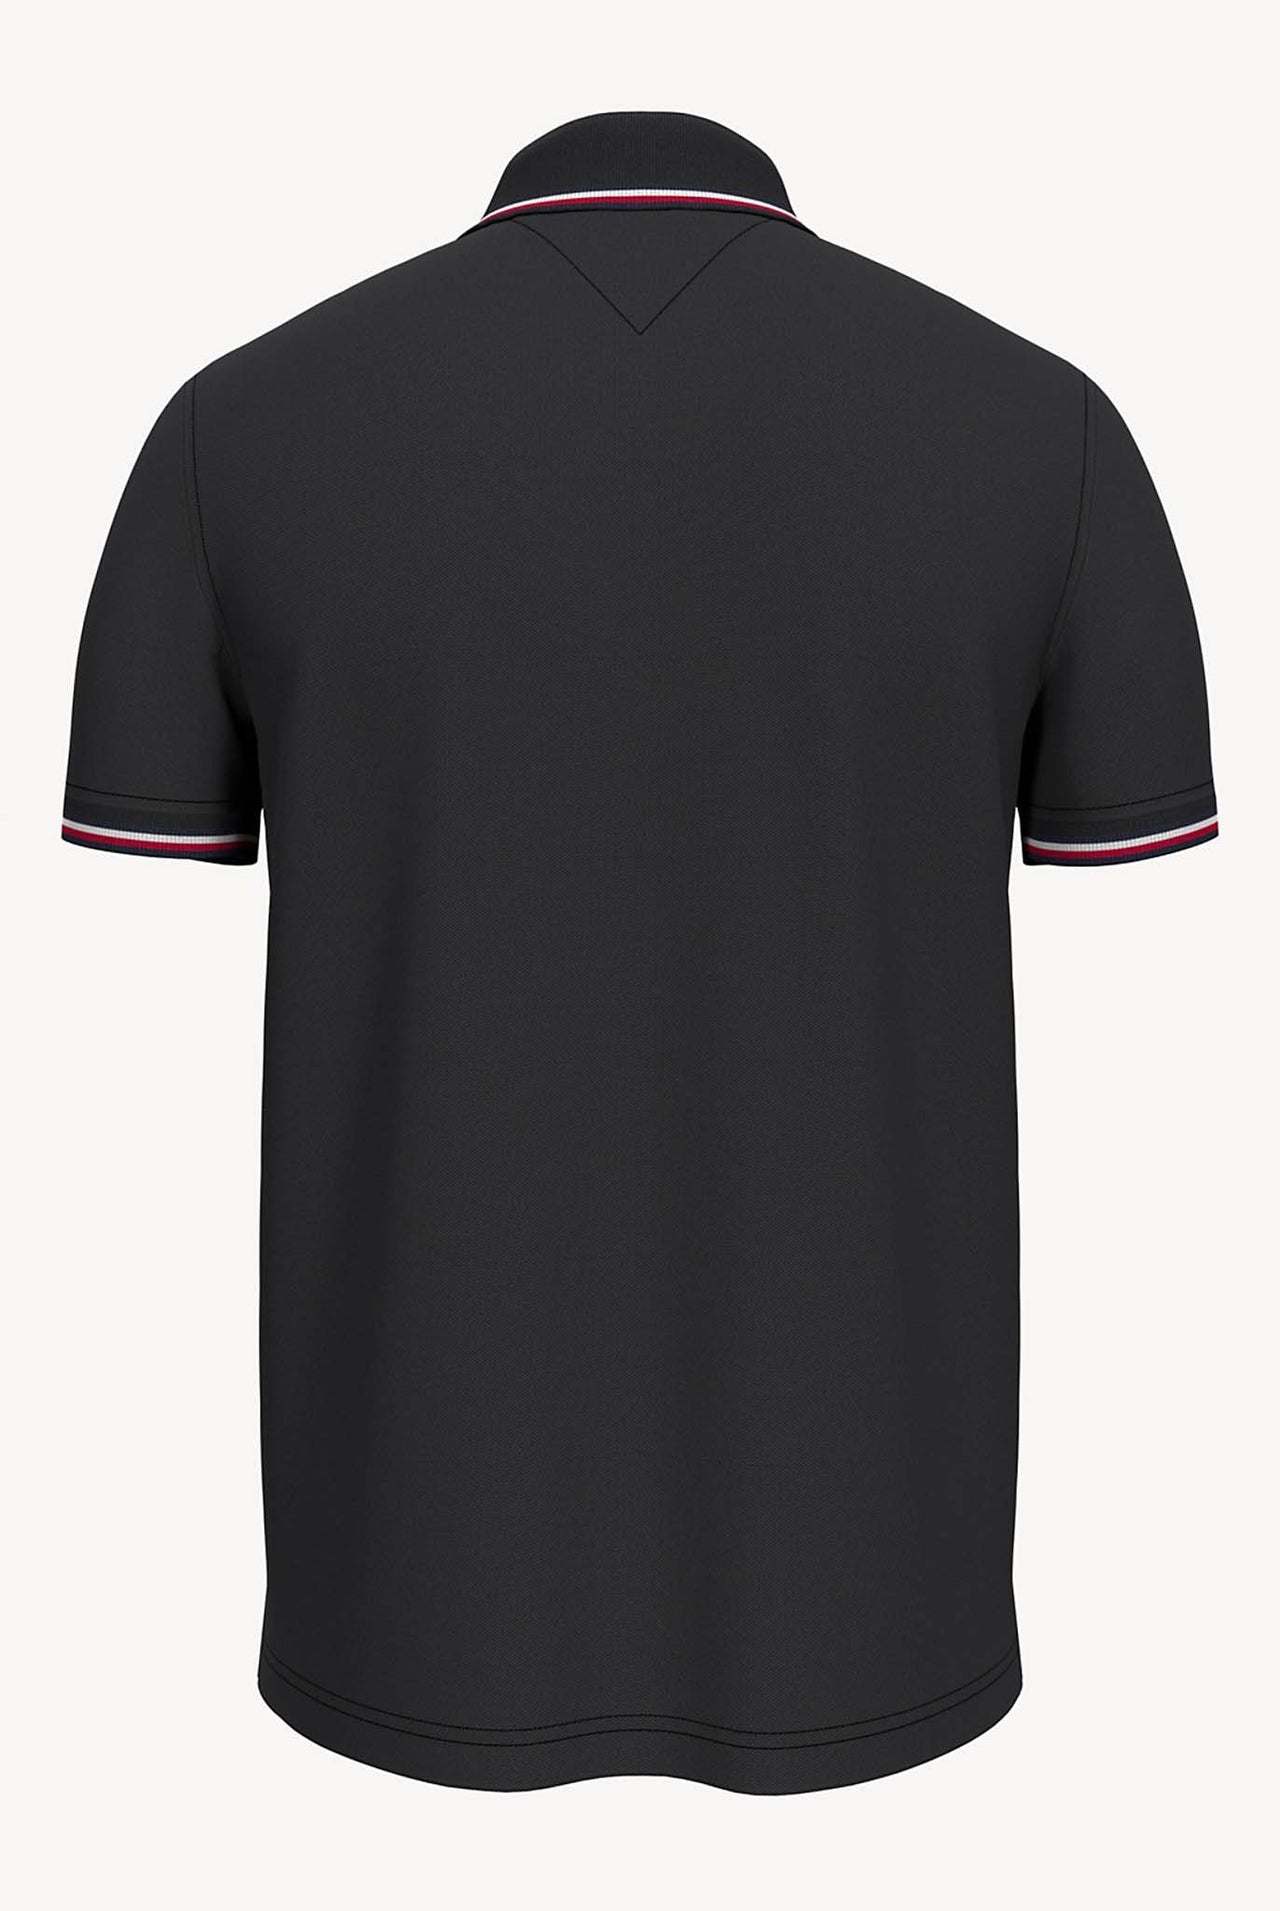 Polo Tommy Hilfiger Negro Con Lineas